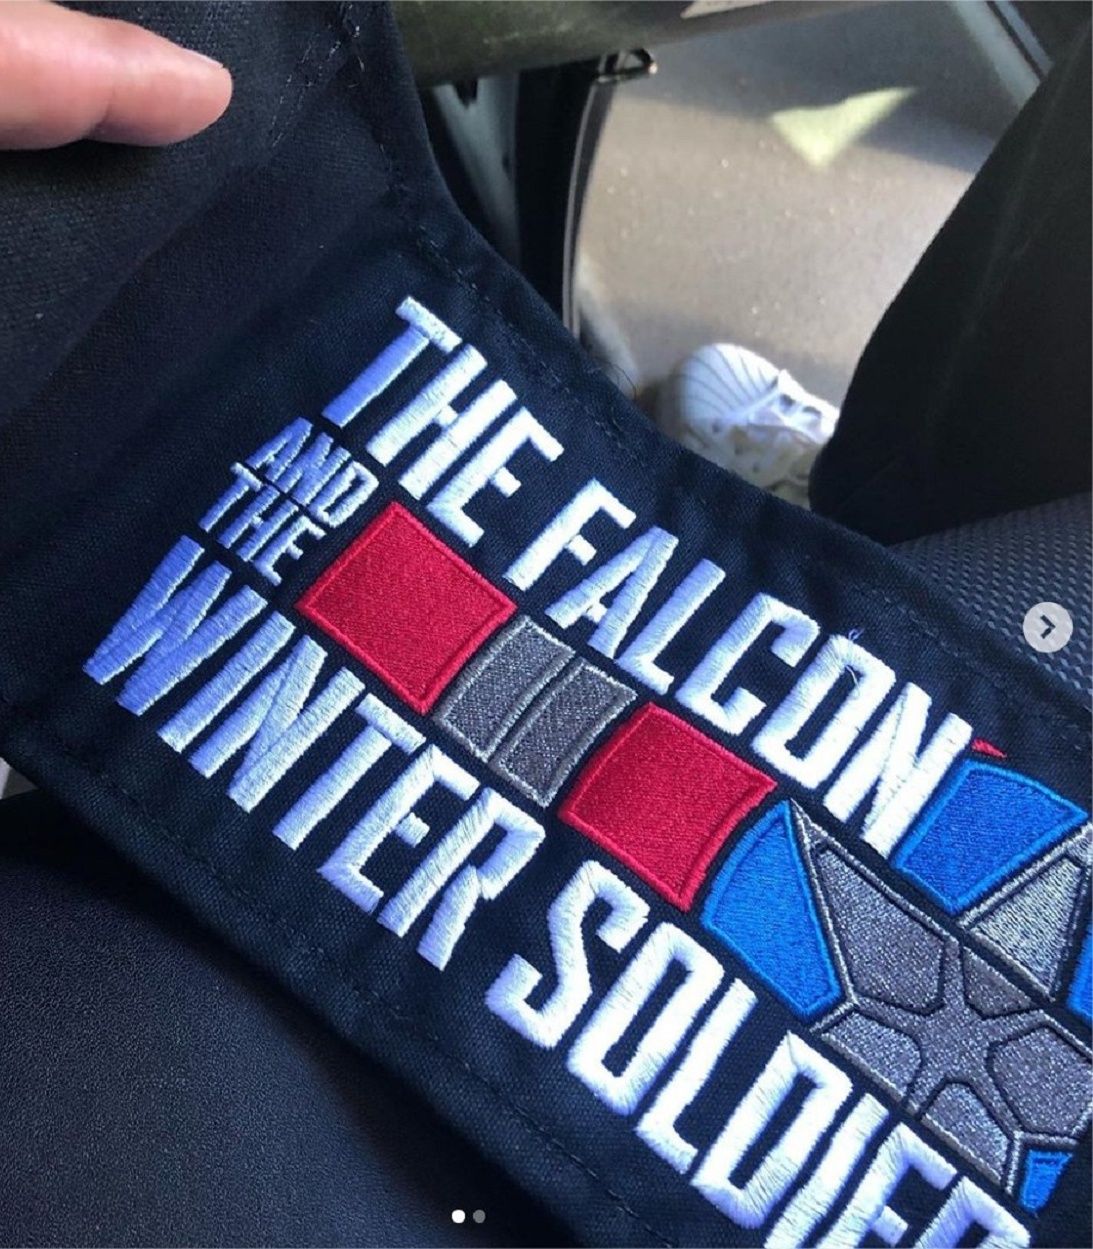 Flacon and Winter Soldier Day 1 filming 1093